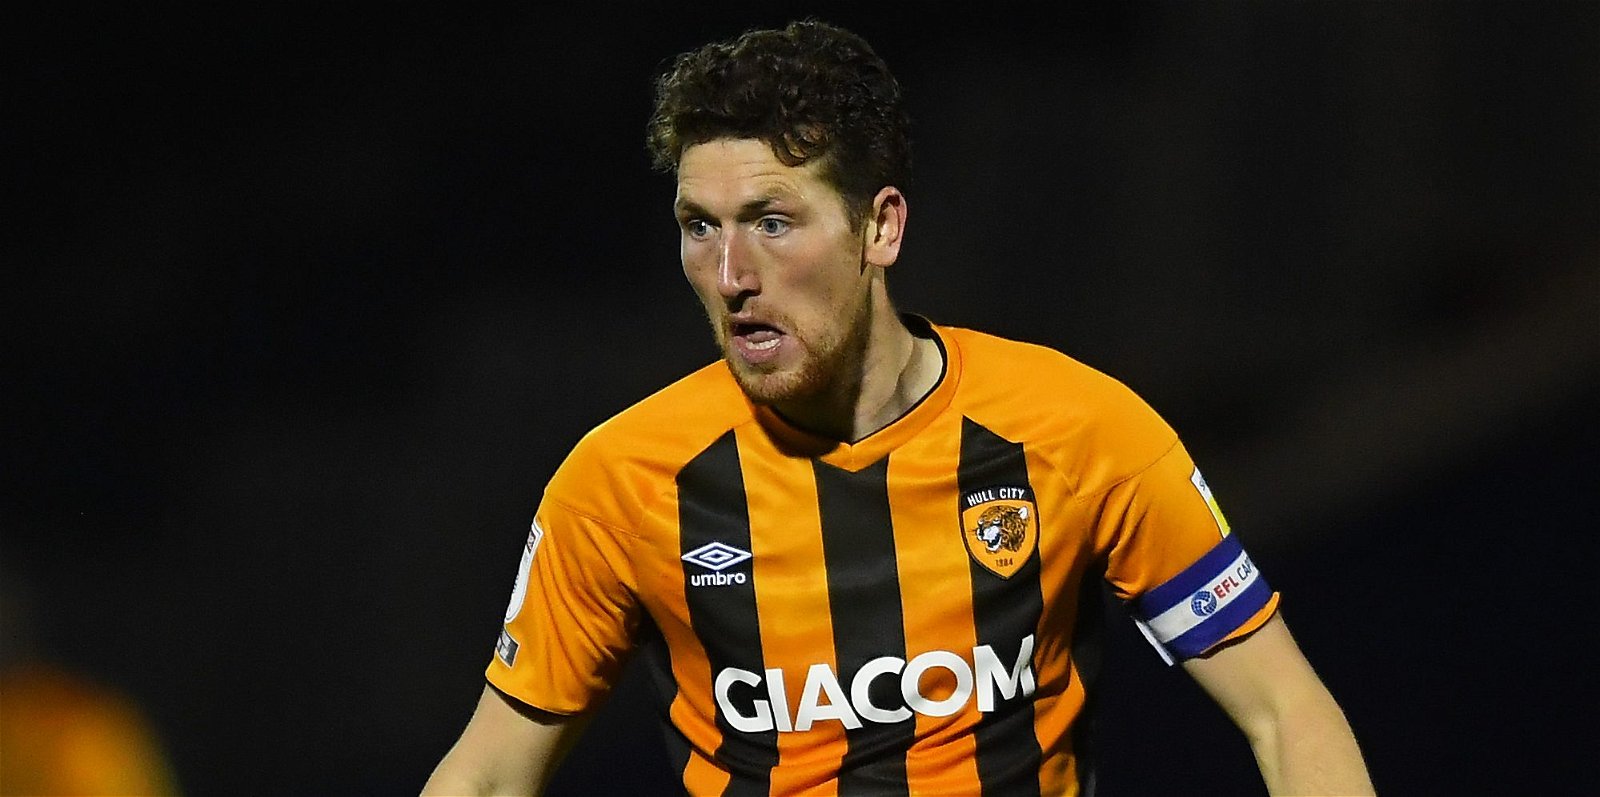 Hull City Ipswich Town, Hull City captain Richard Smallwood wanted by Ipswich Town